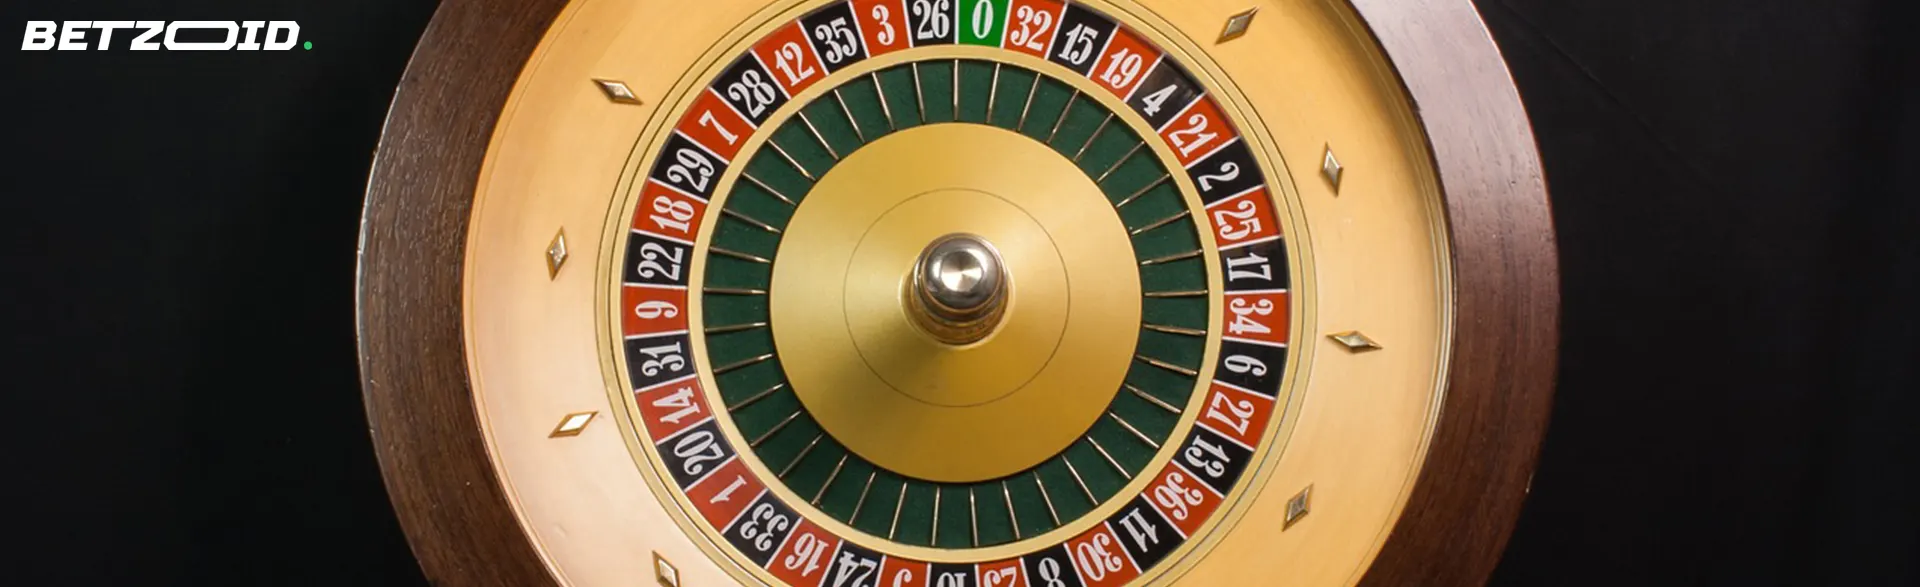 A close-up view of a roulette wheel with numbers and a single zero, set against a dark background.